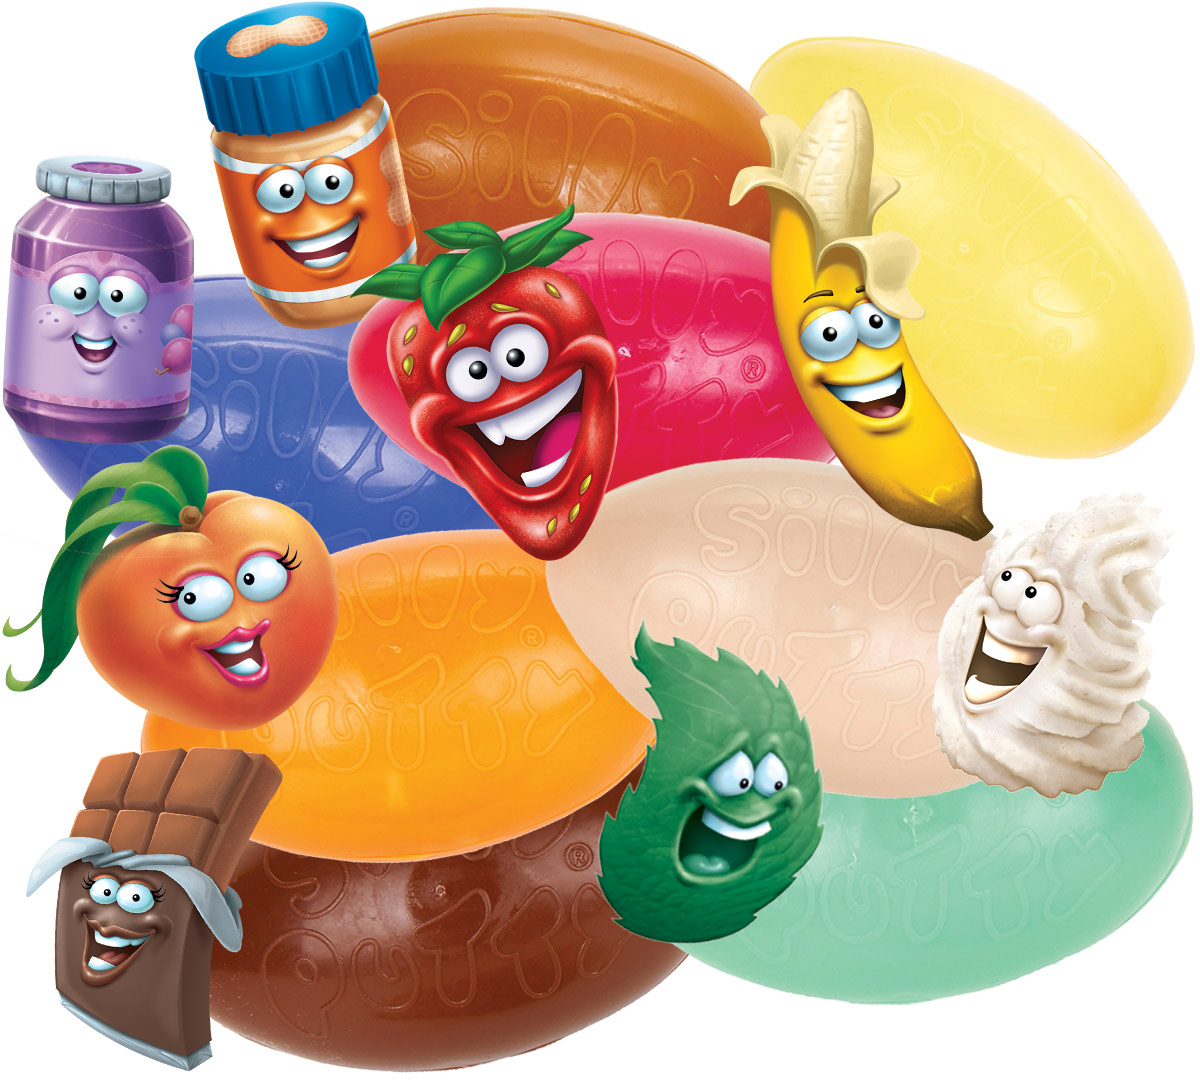 Silly Putty Crayola Silly Scents Mystery Putty 